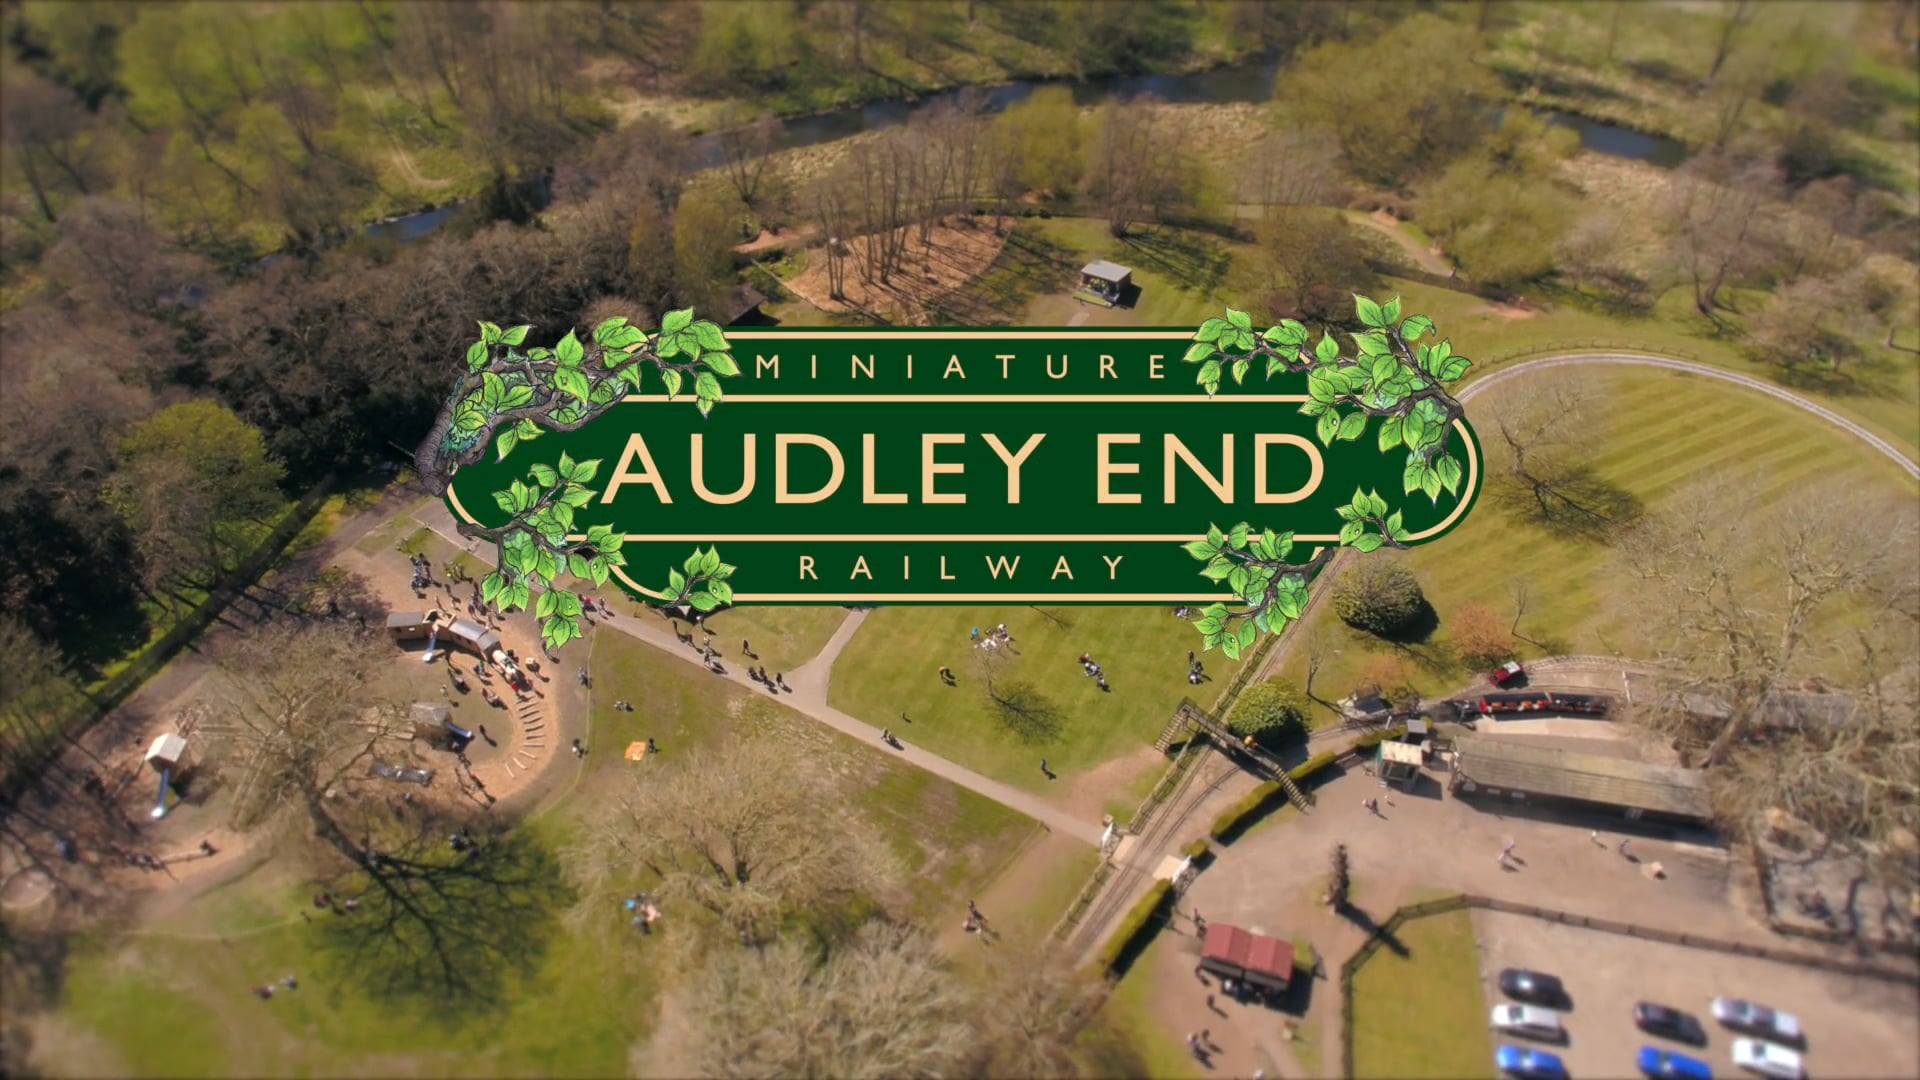 Audley End Miniature Railway Easter Special